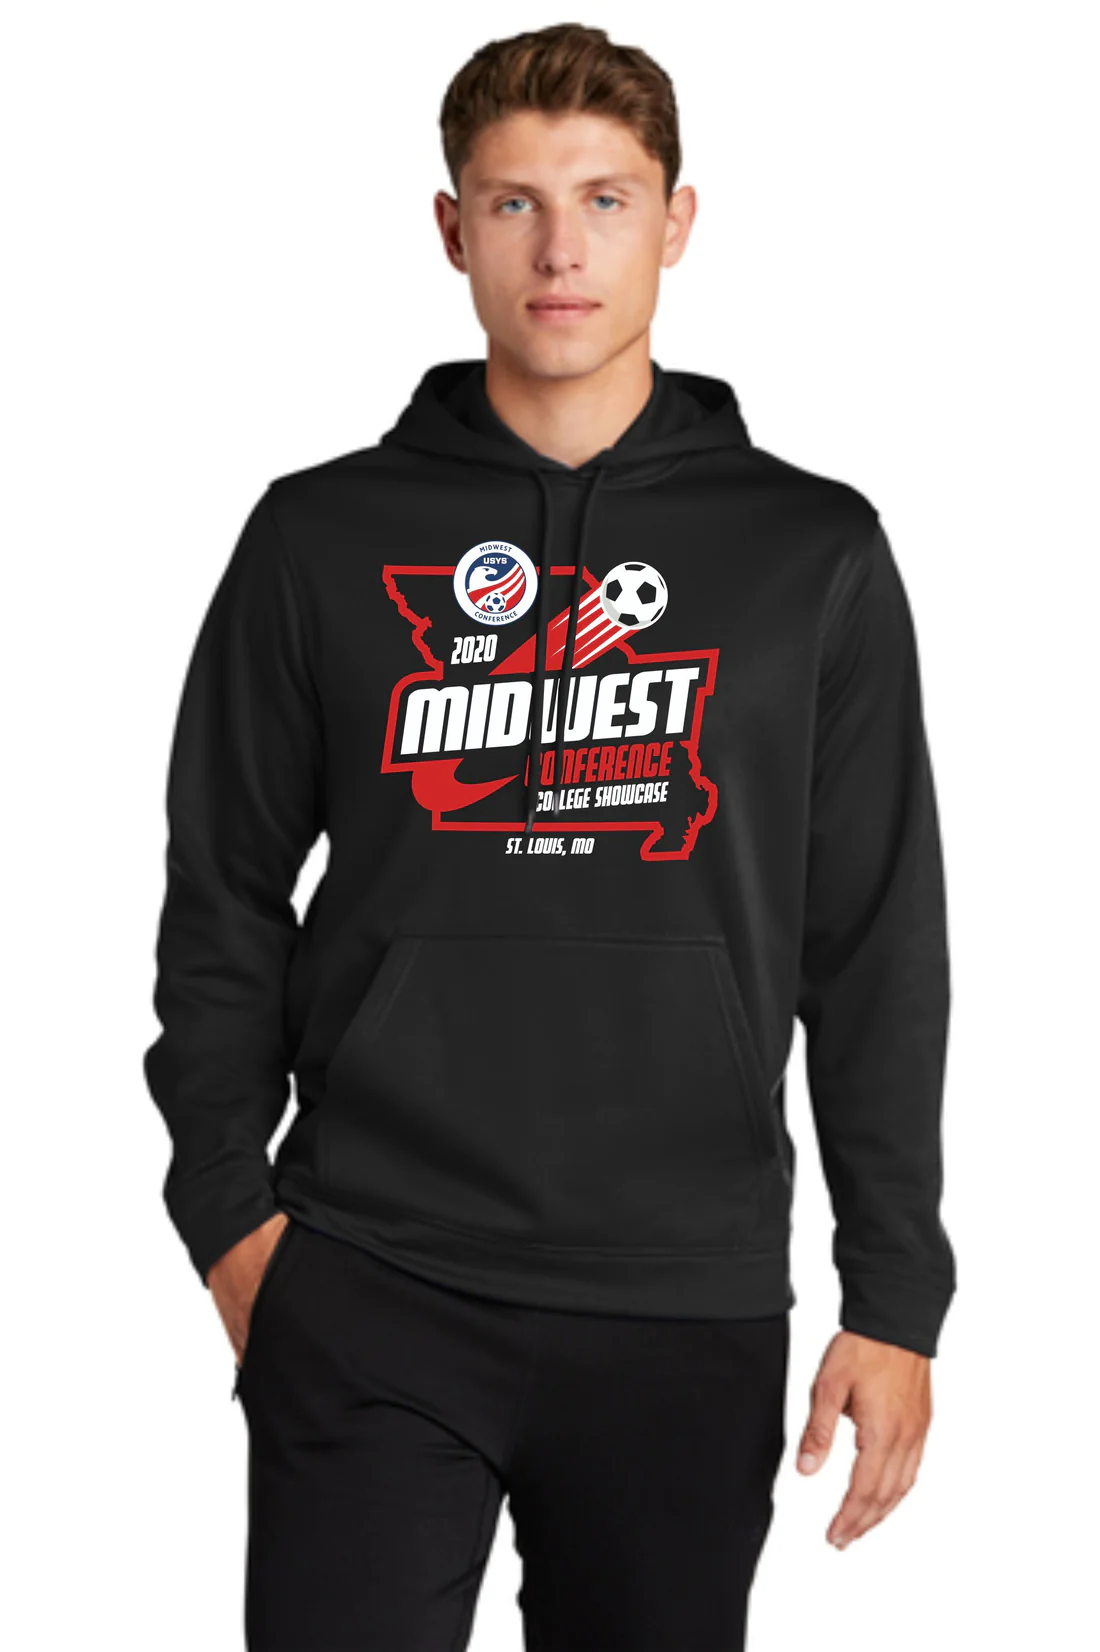 2020 Midwest Conference - Hoodie